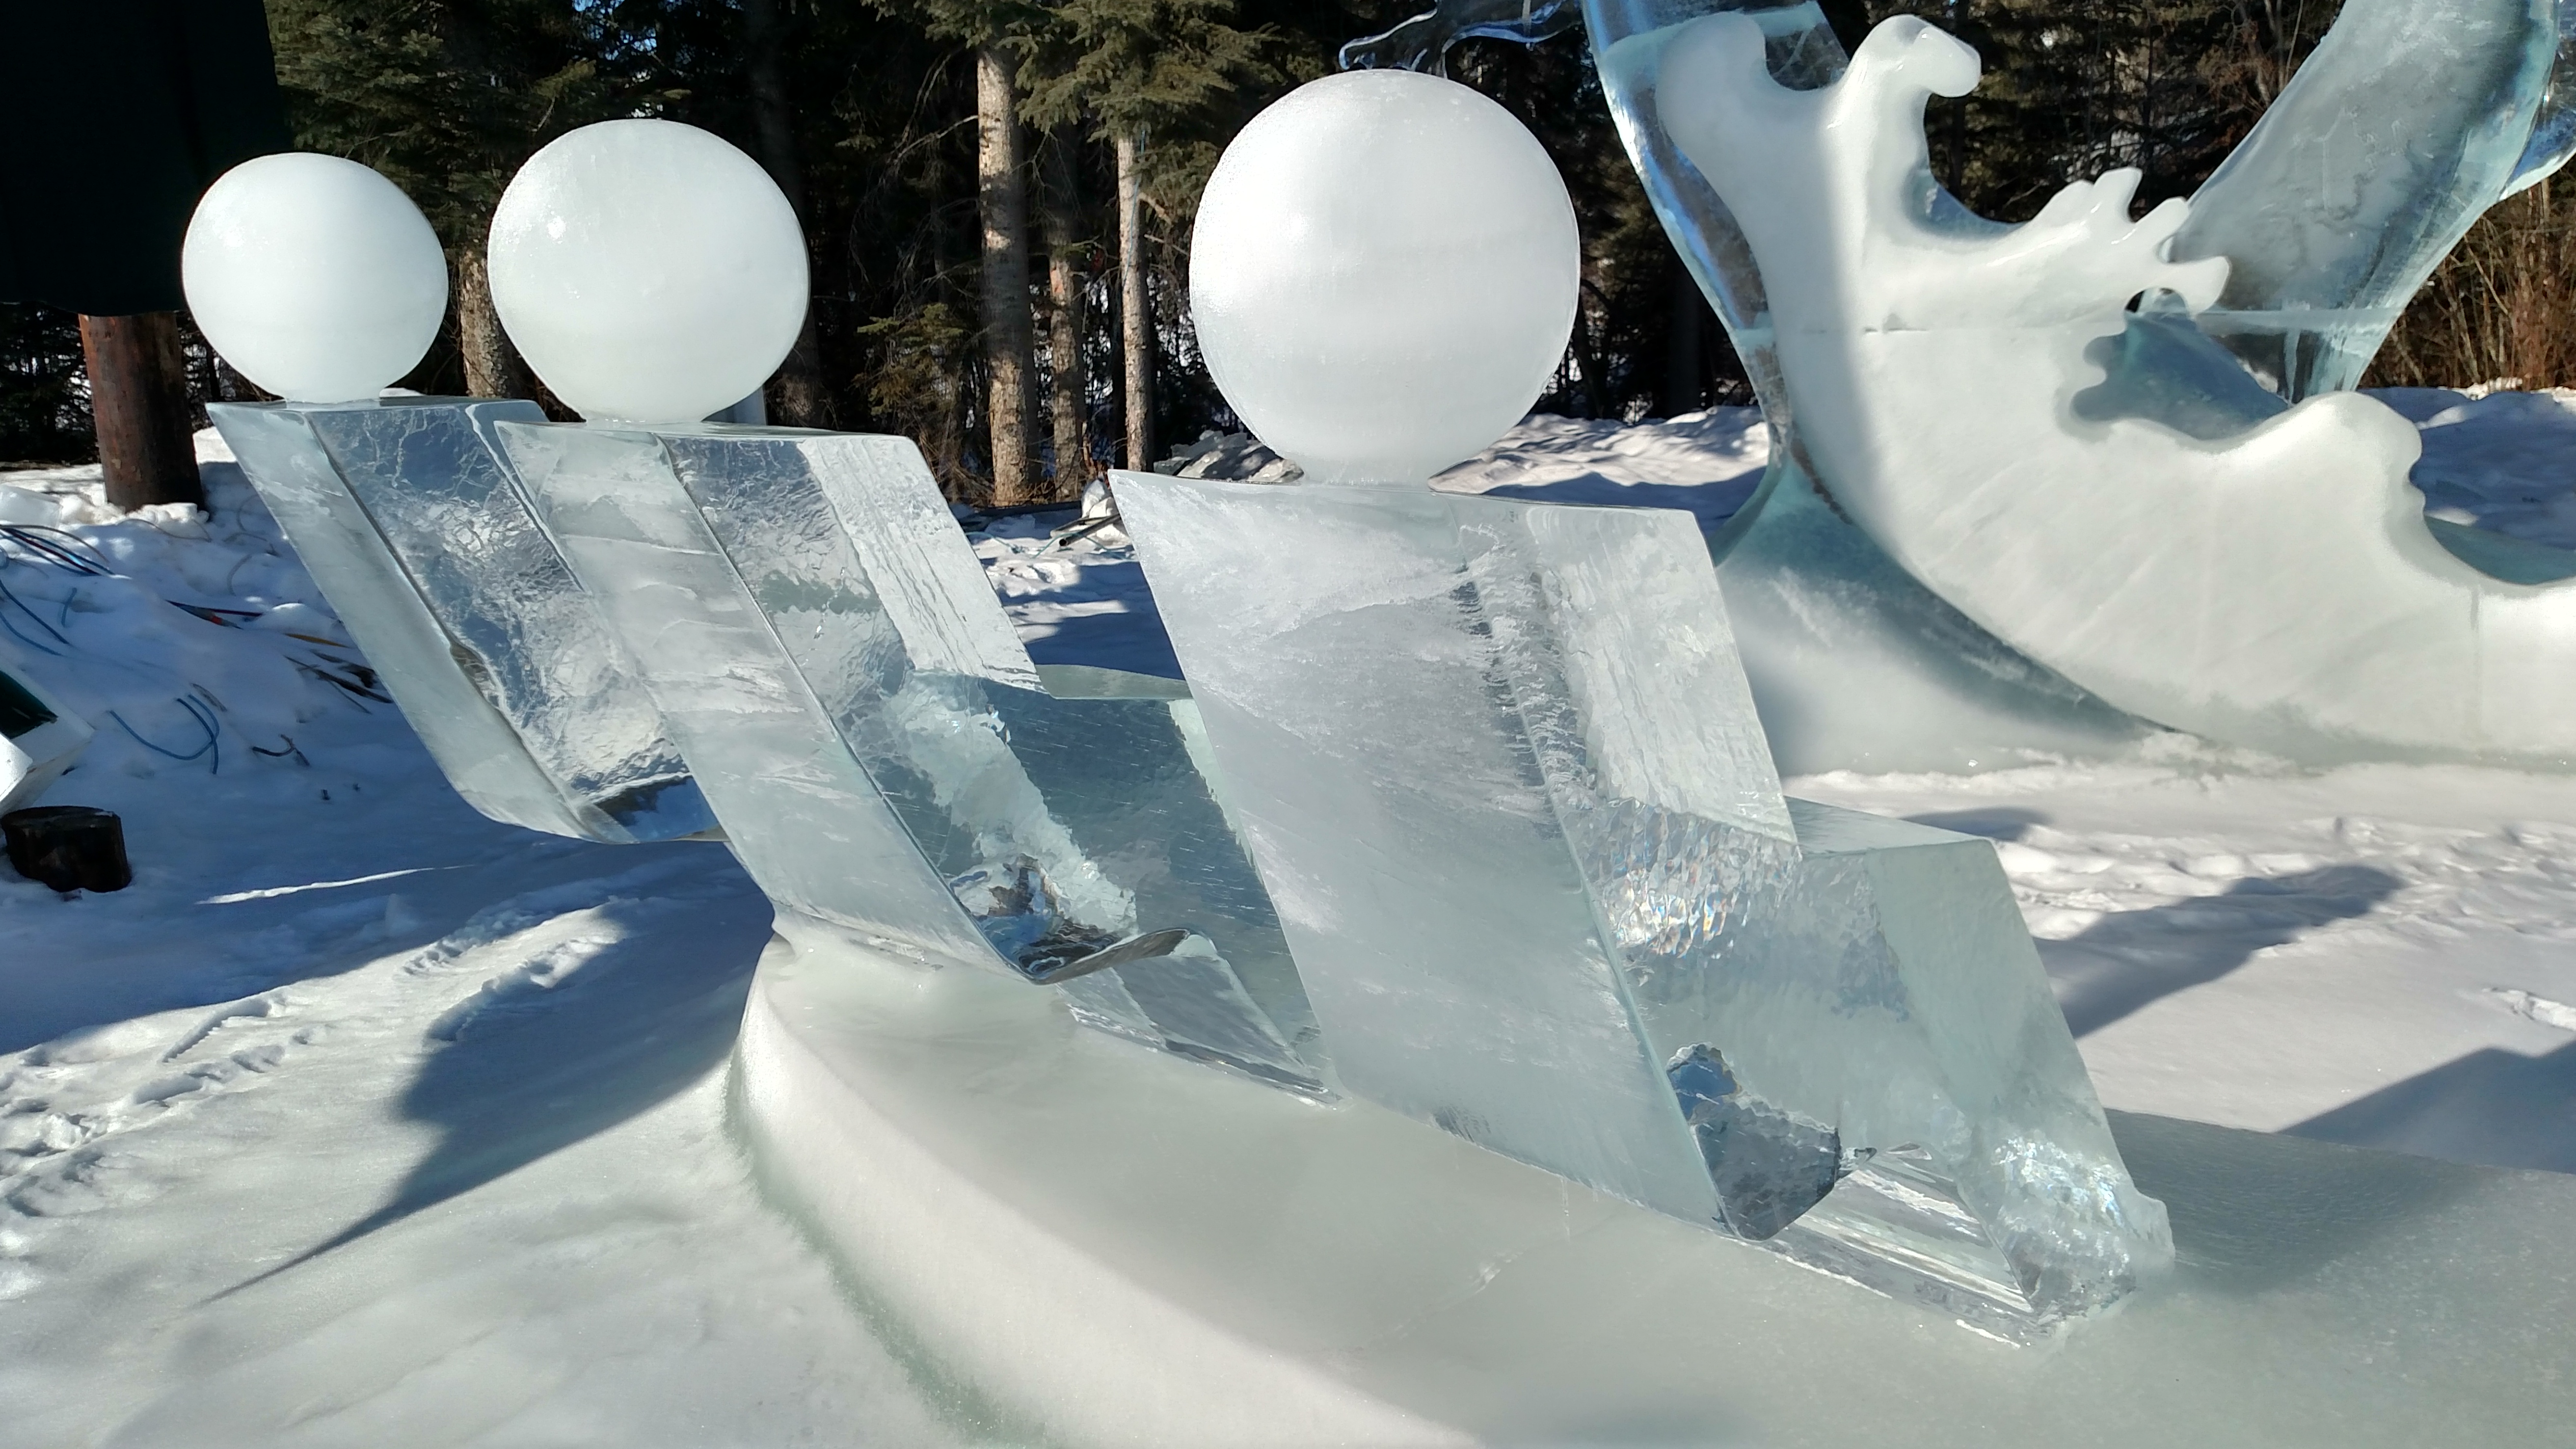 Fairbanks Ice Sculptures and Hot Springs Budget Wanderer